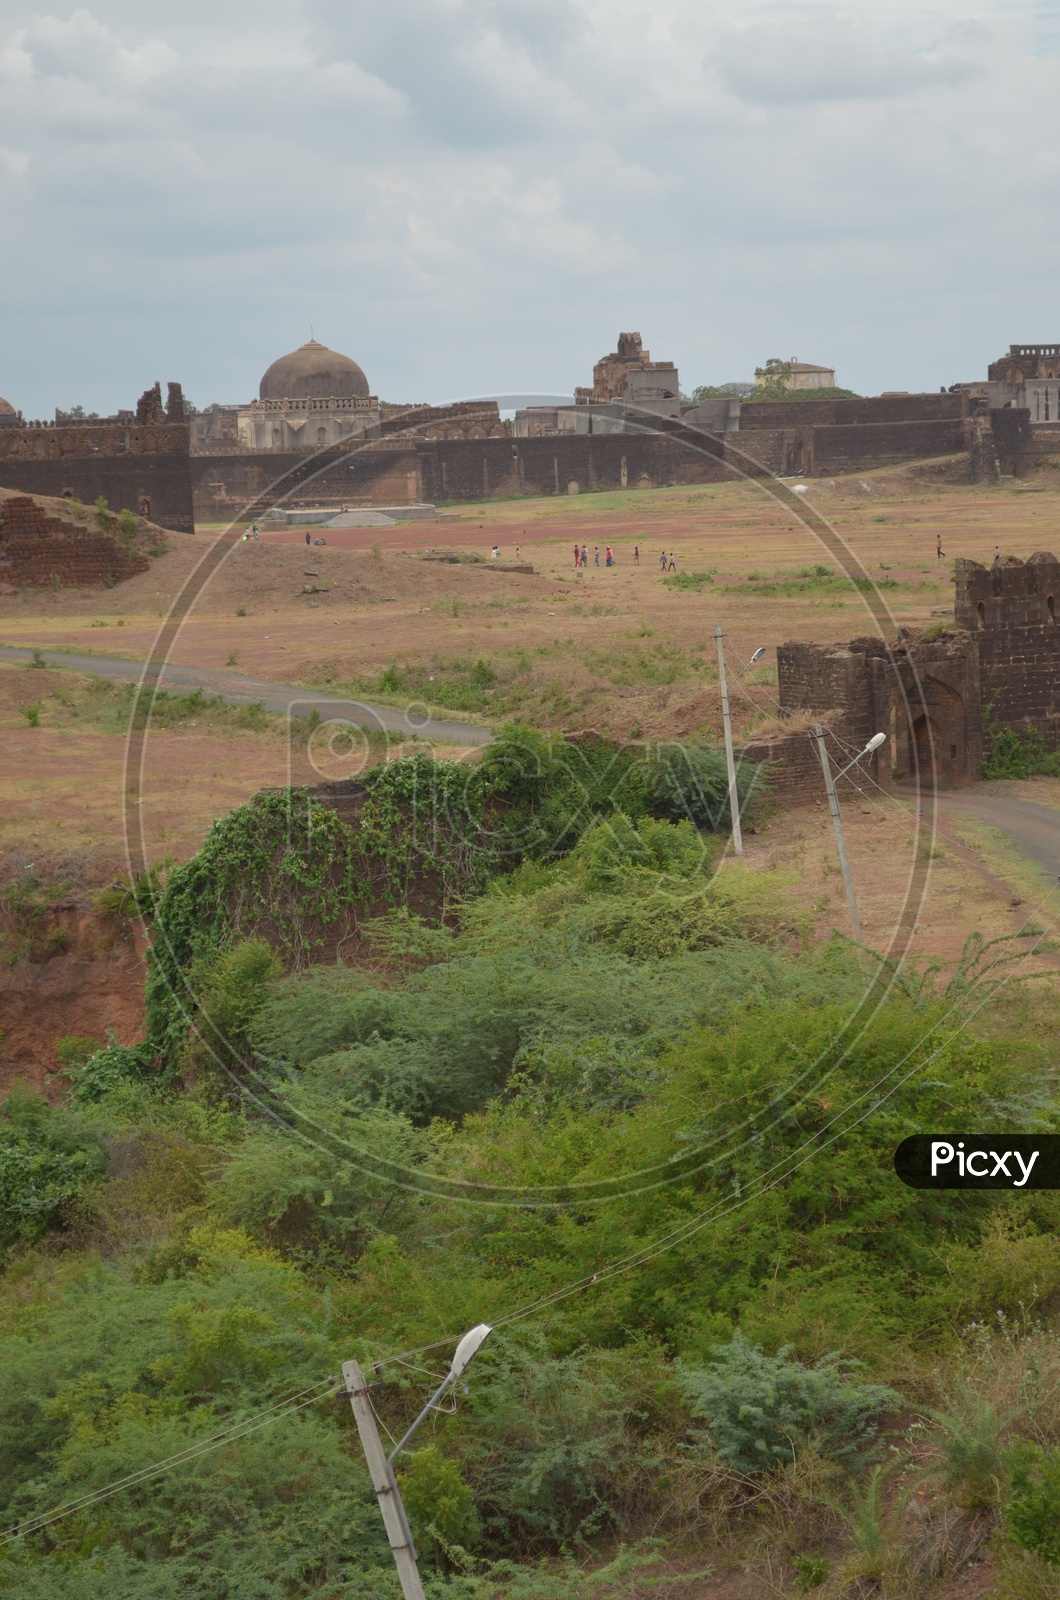 Historical Architecture / Historical Constructions of Bidar Fort